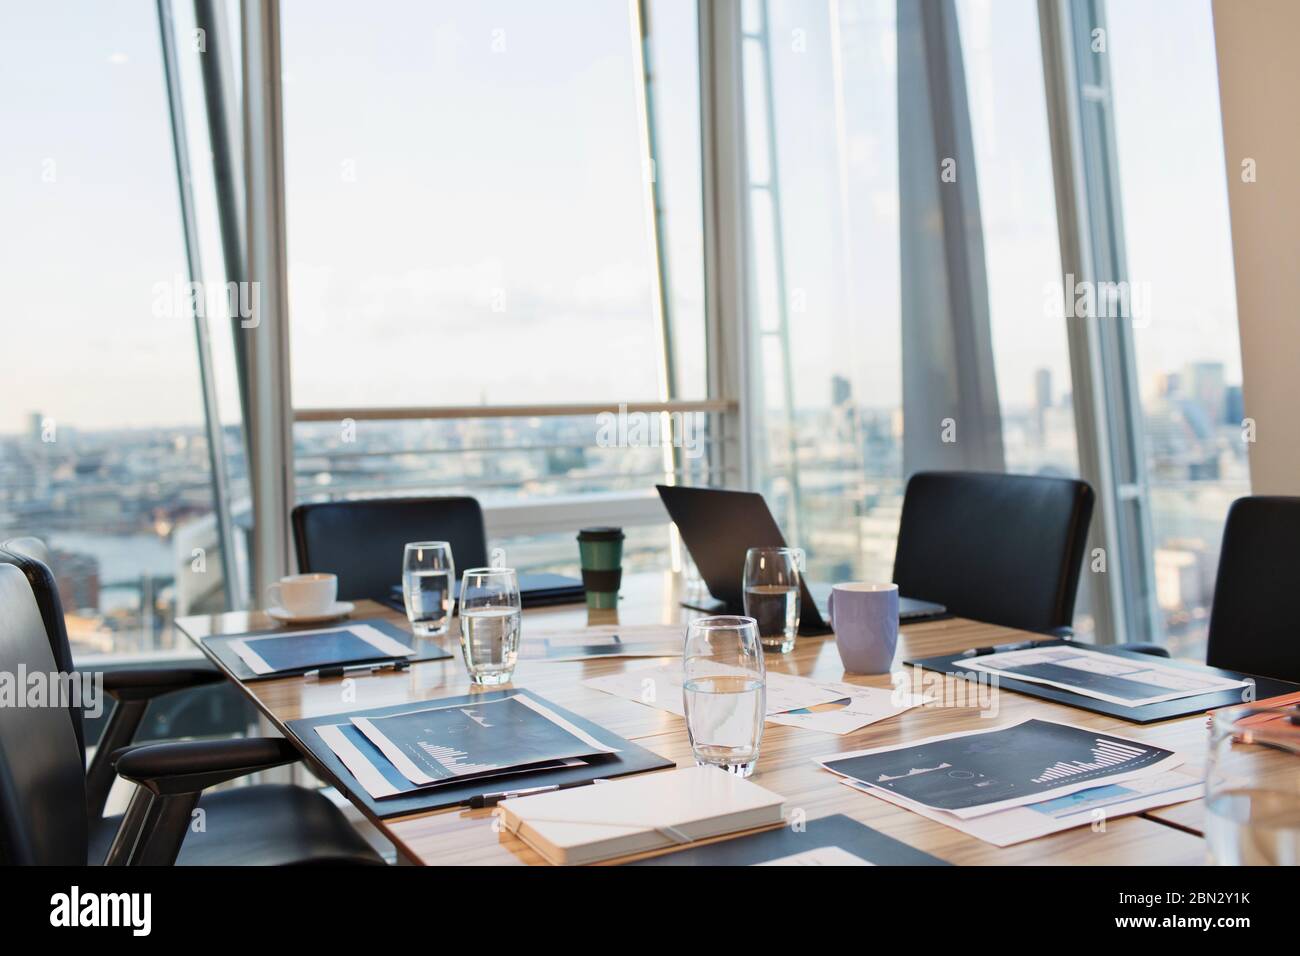 Business conference room overlooking city Stock Photo